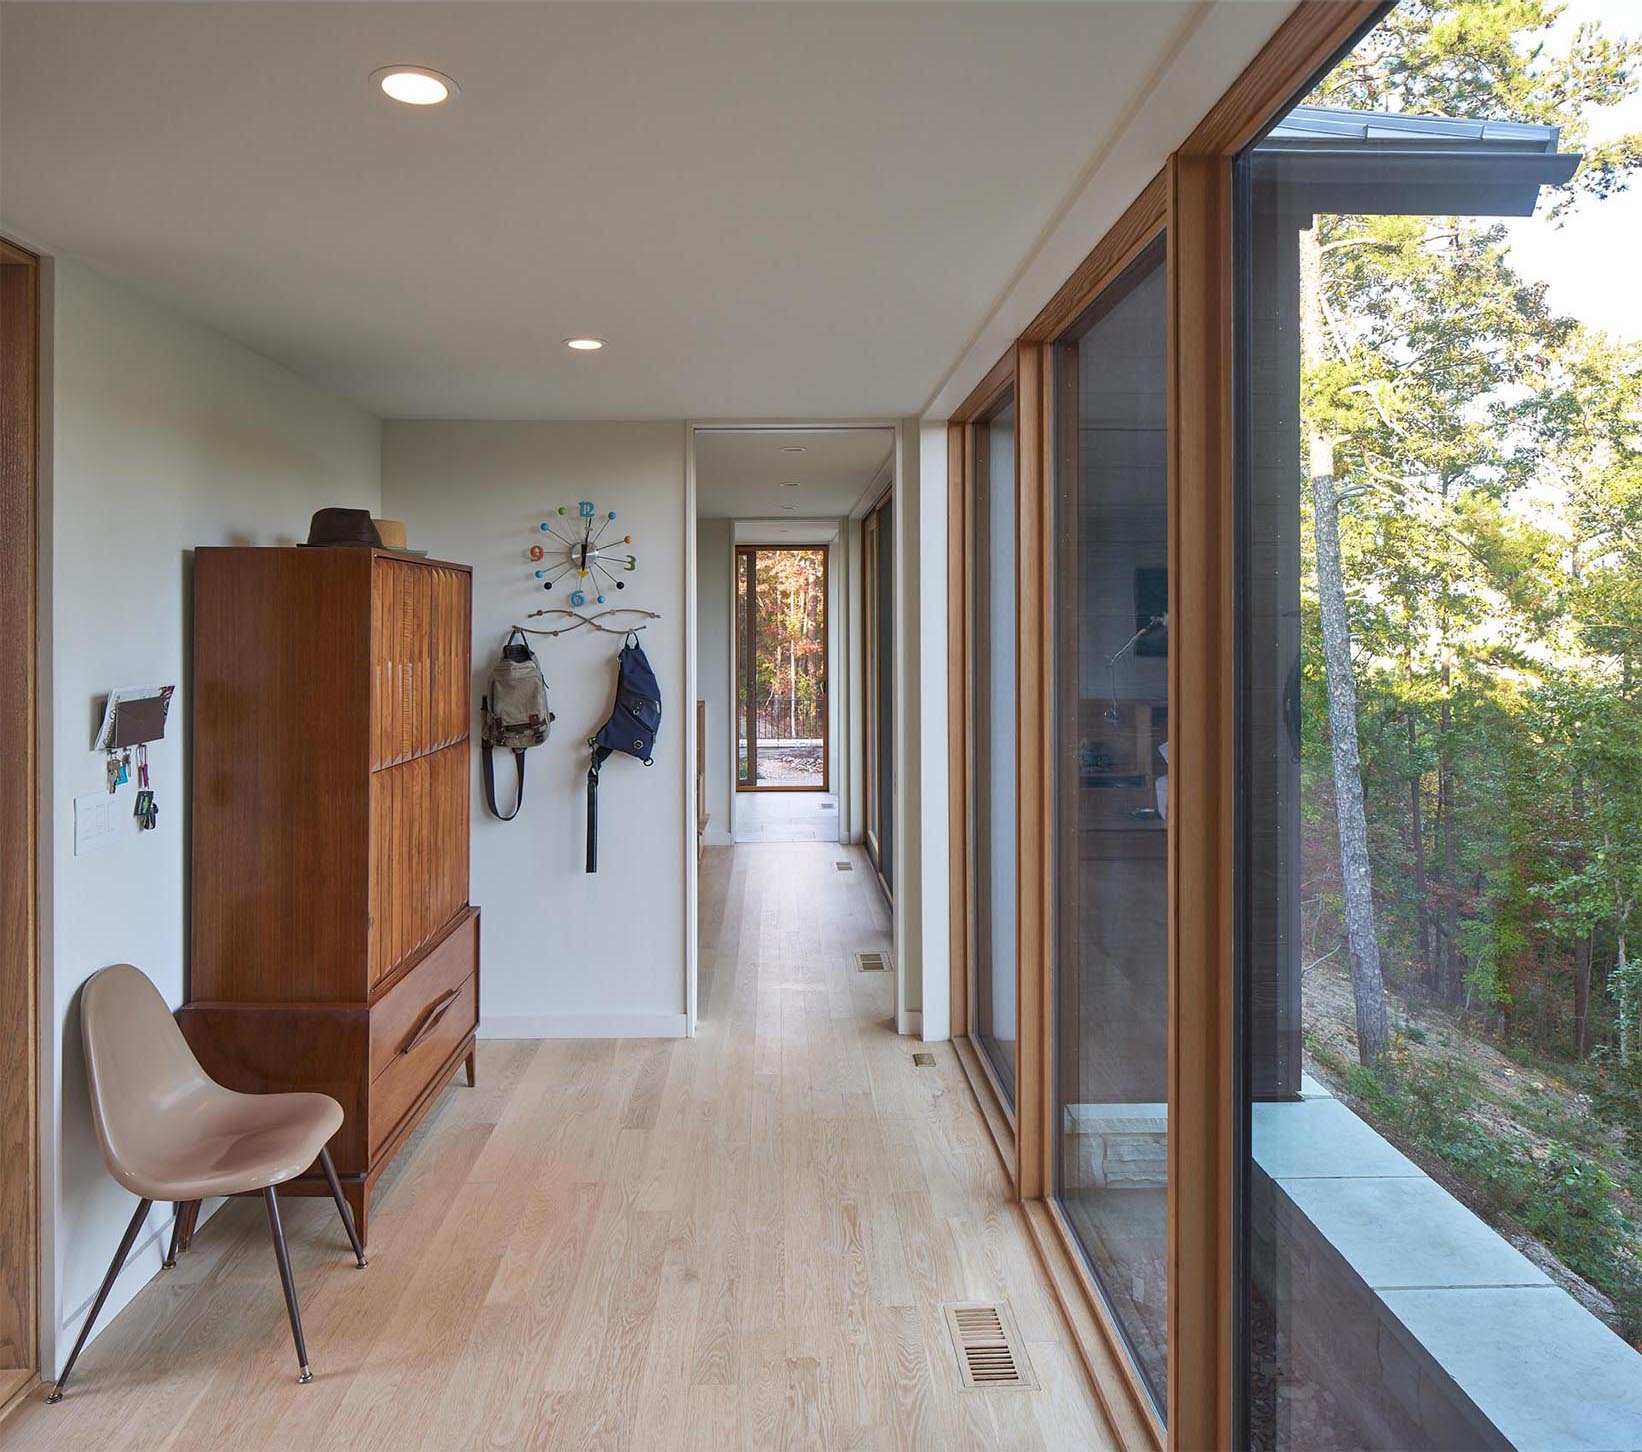 A modern hallway with large floor to ceiling windows that frame views of the trees, and create an abundance of natural light for the hallways.